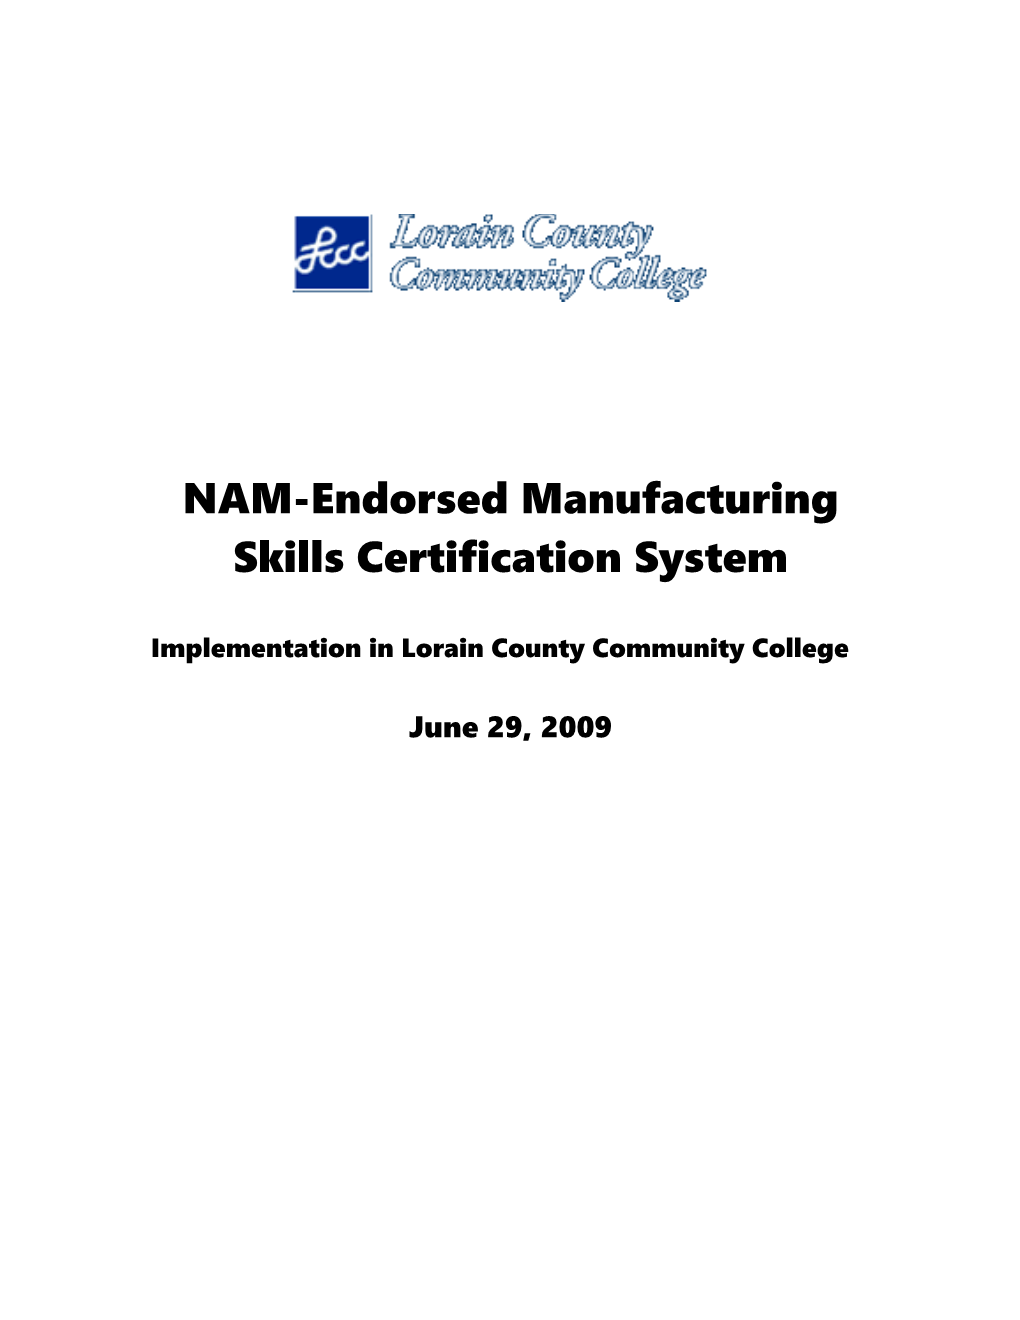 Ohio S Workplan for Implementing the NAM-Endorsed Manufacturing Skills Certification System